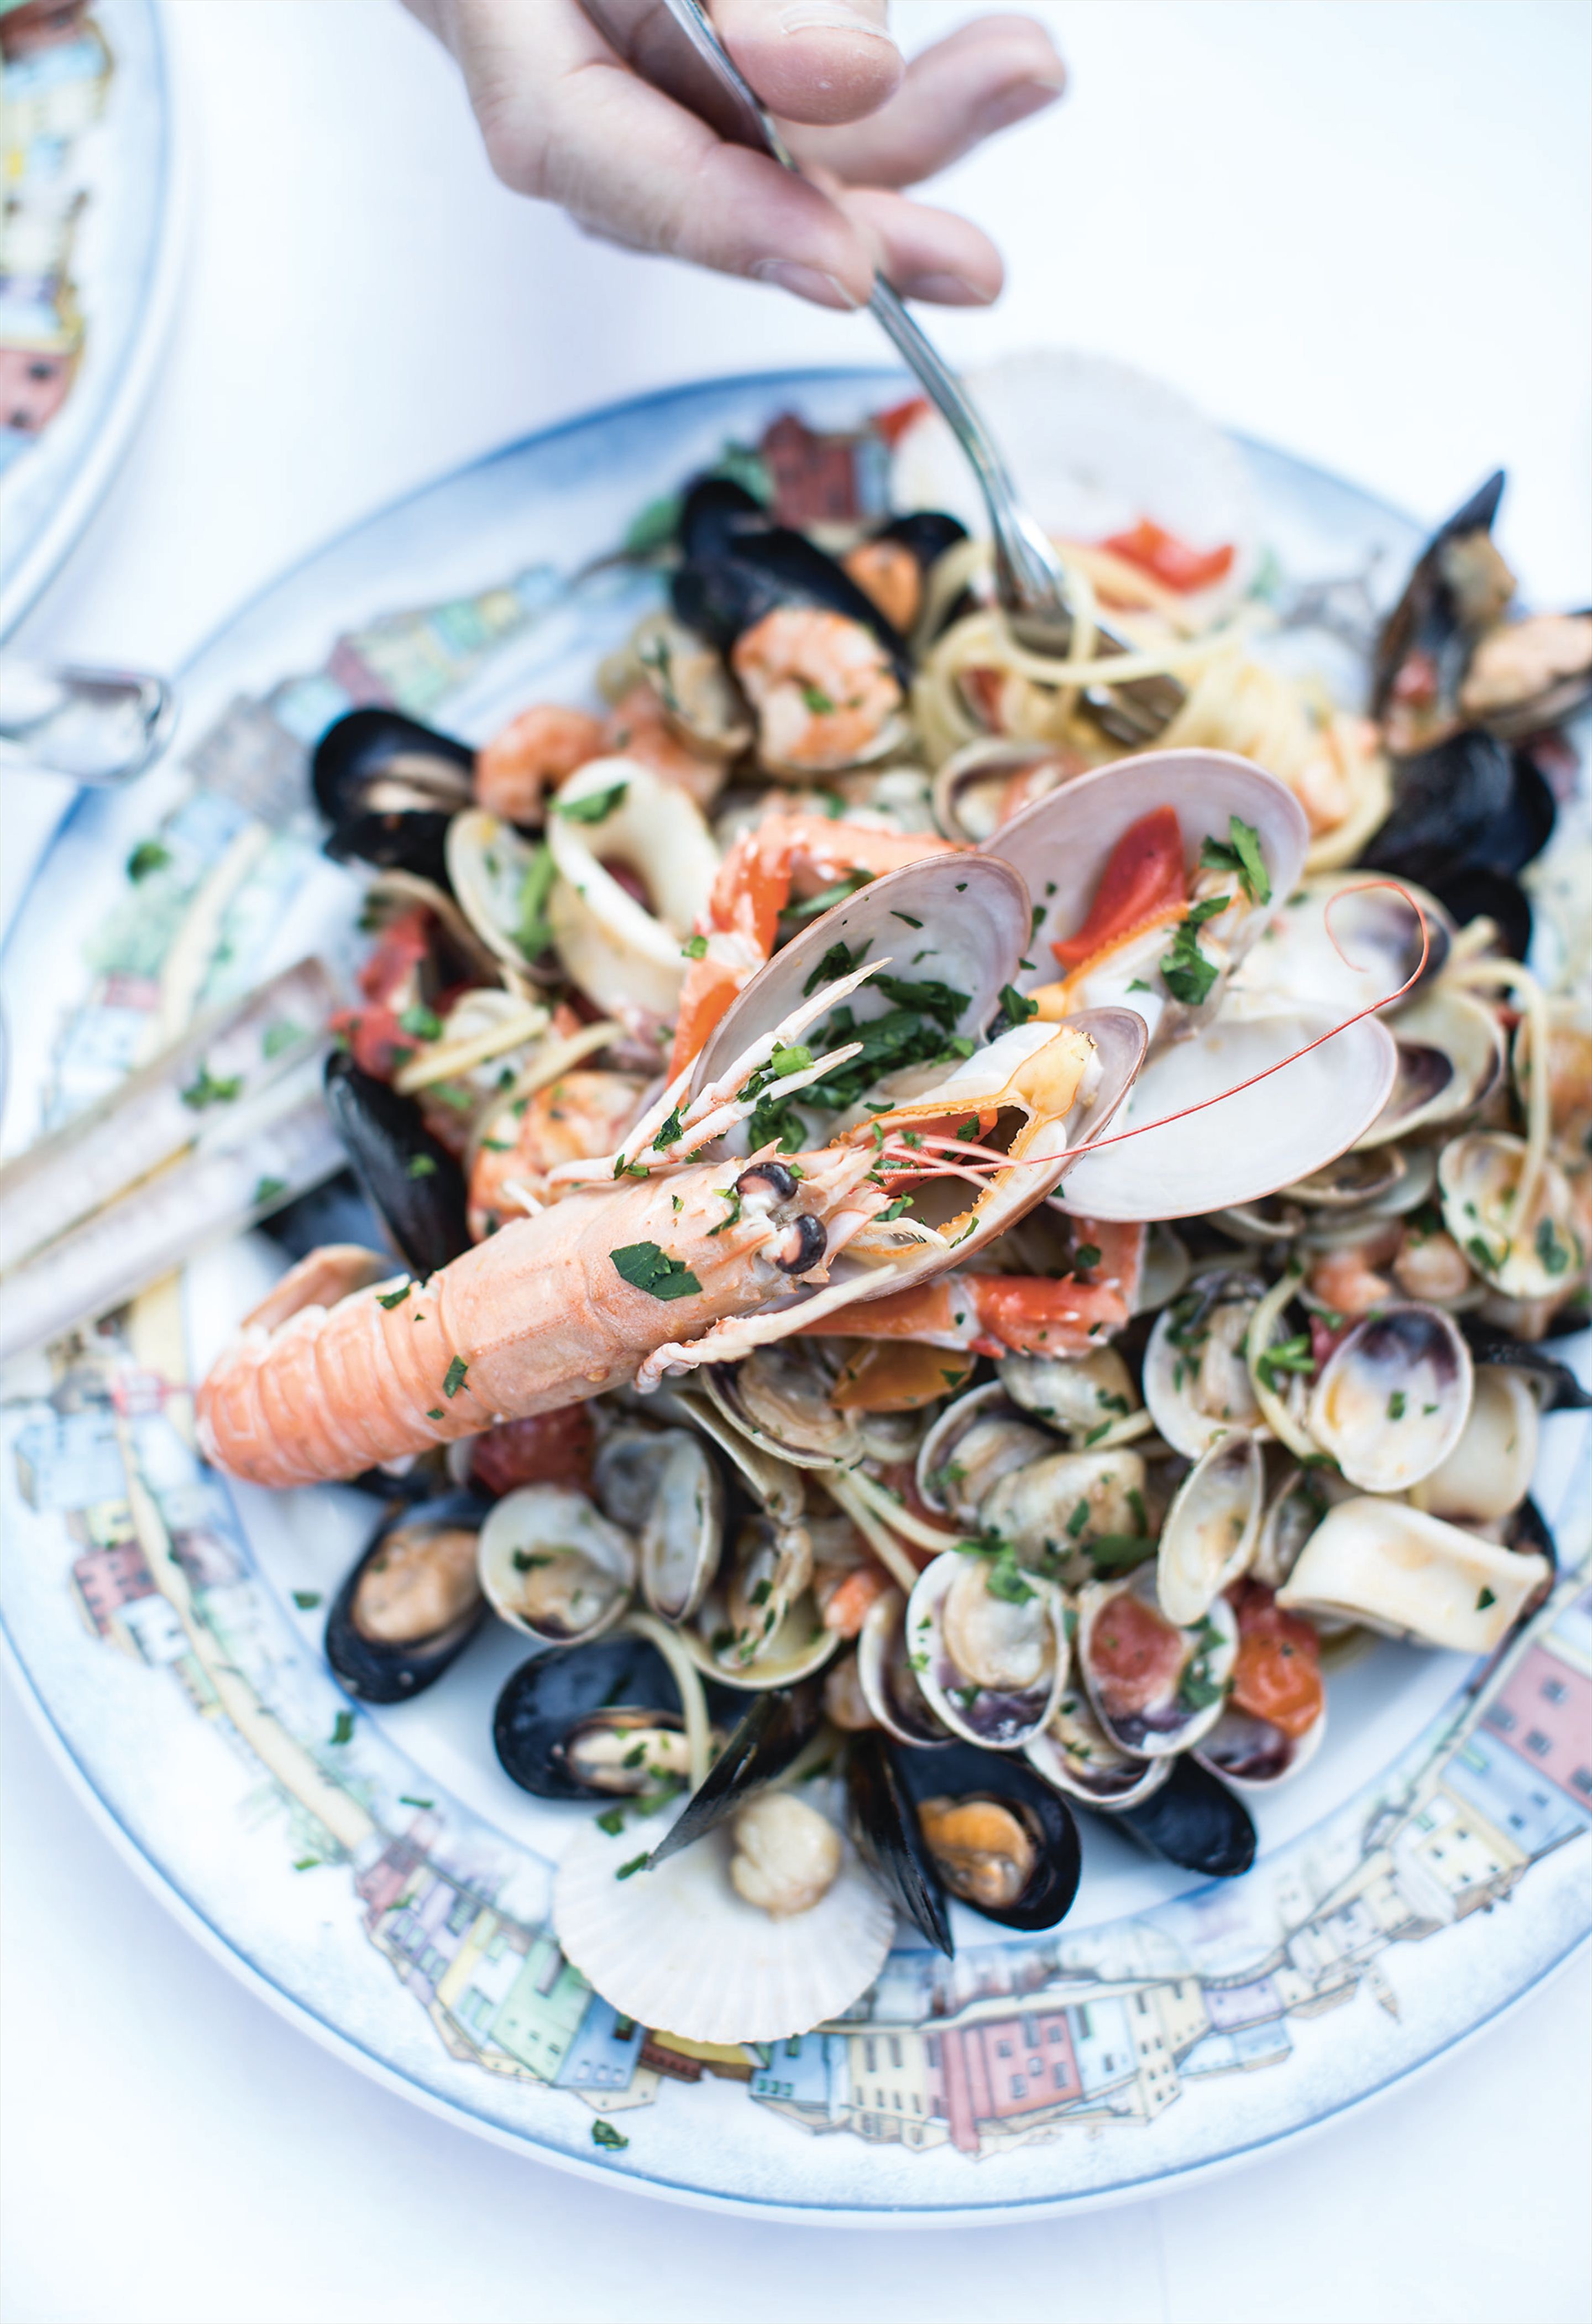 Linguine with seafood